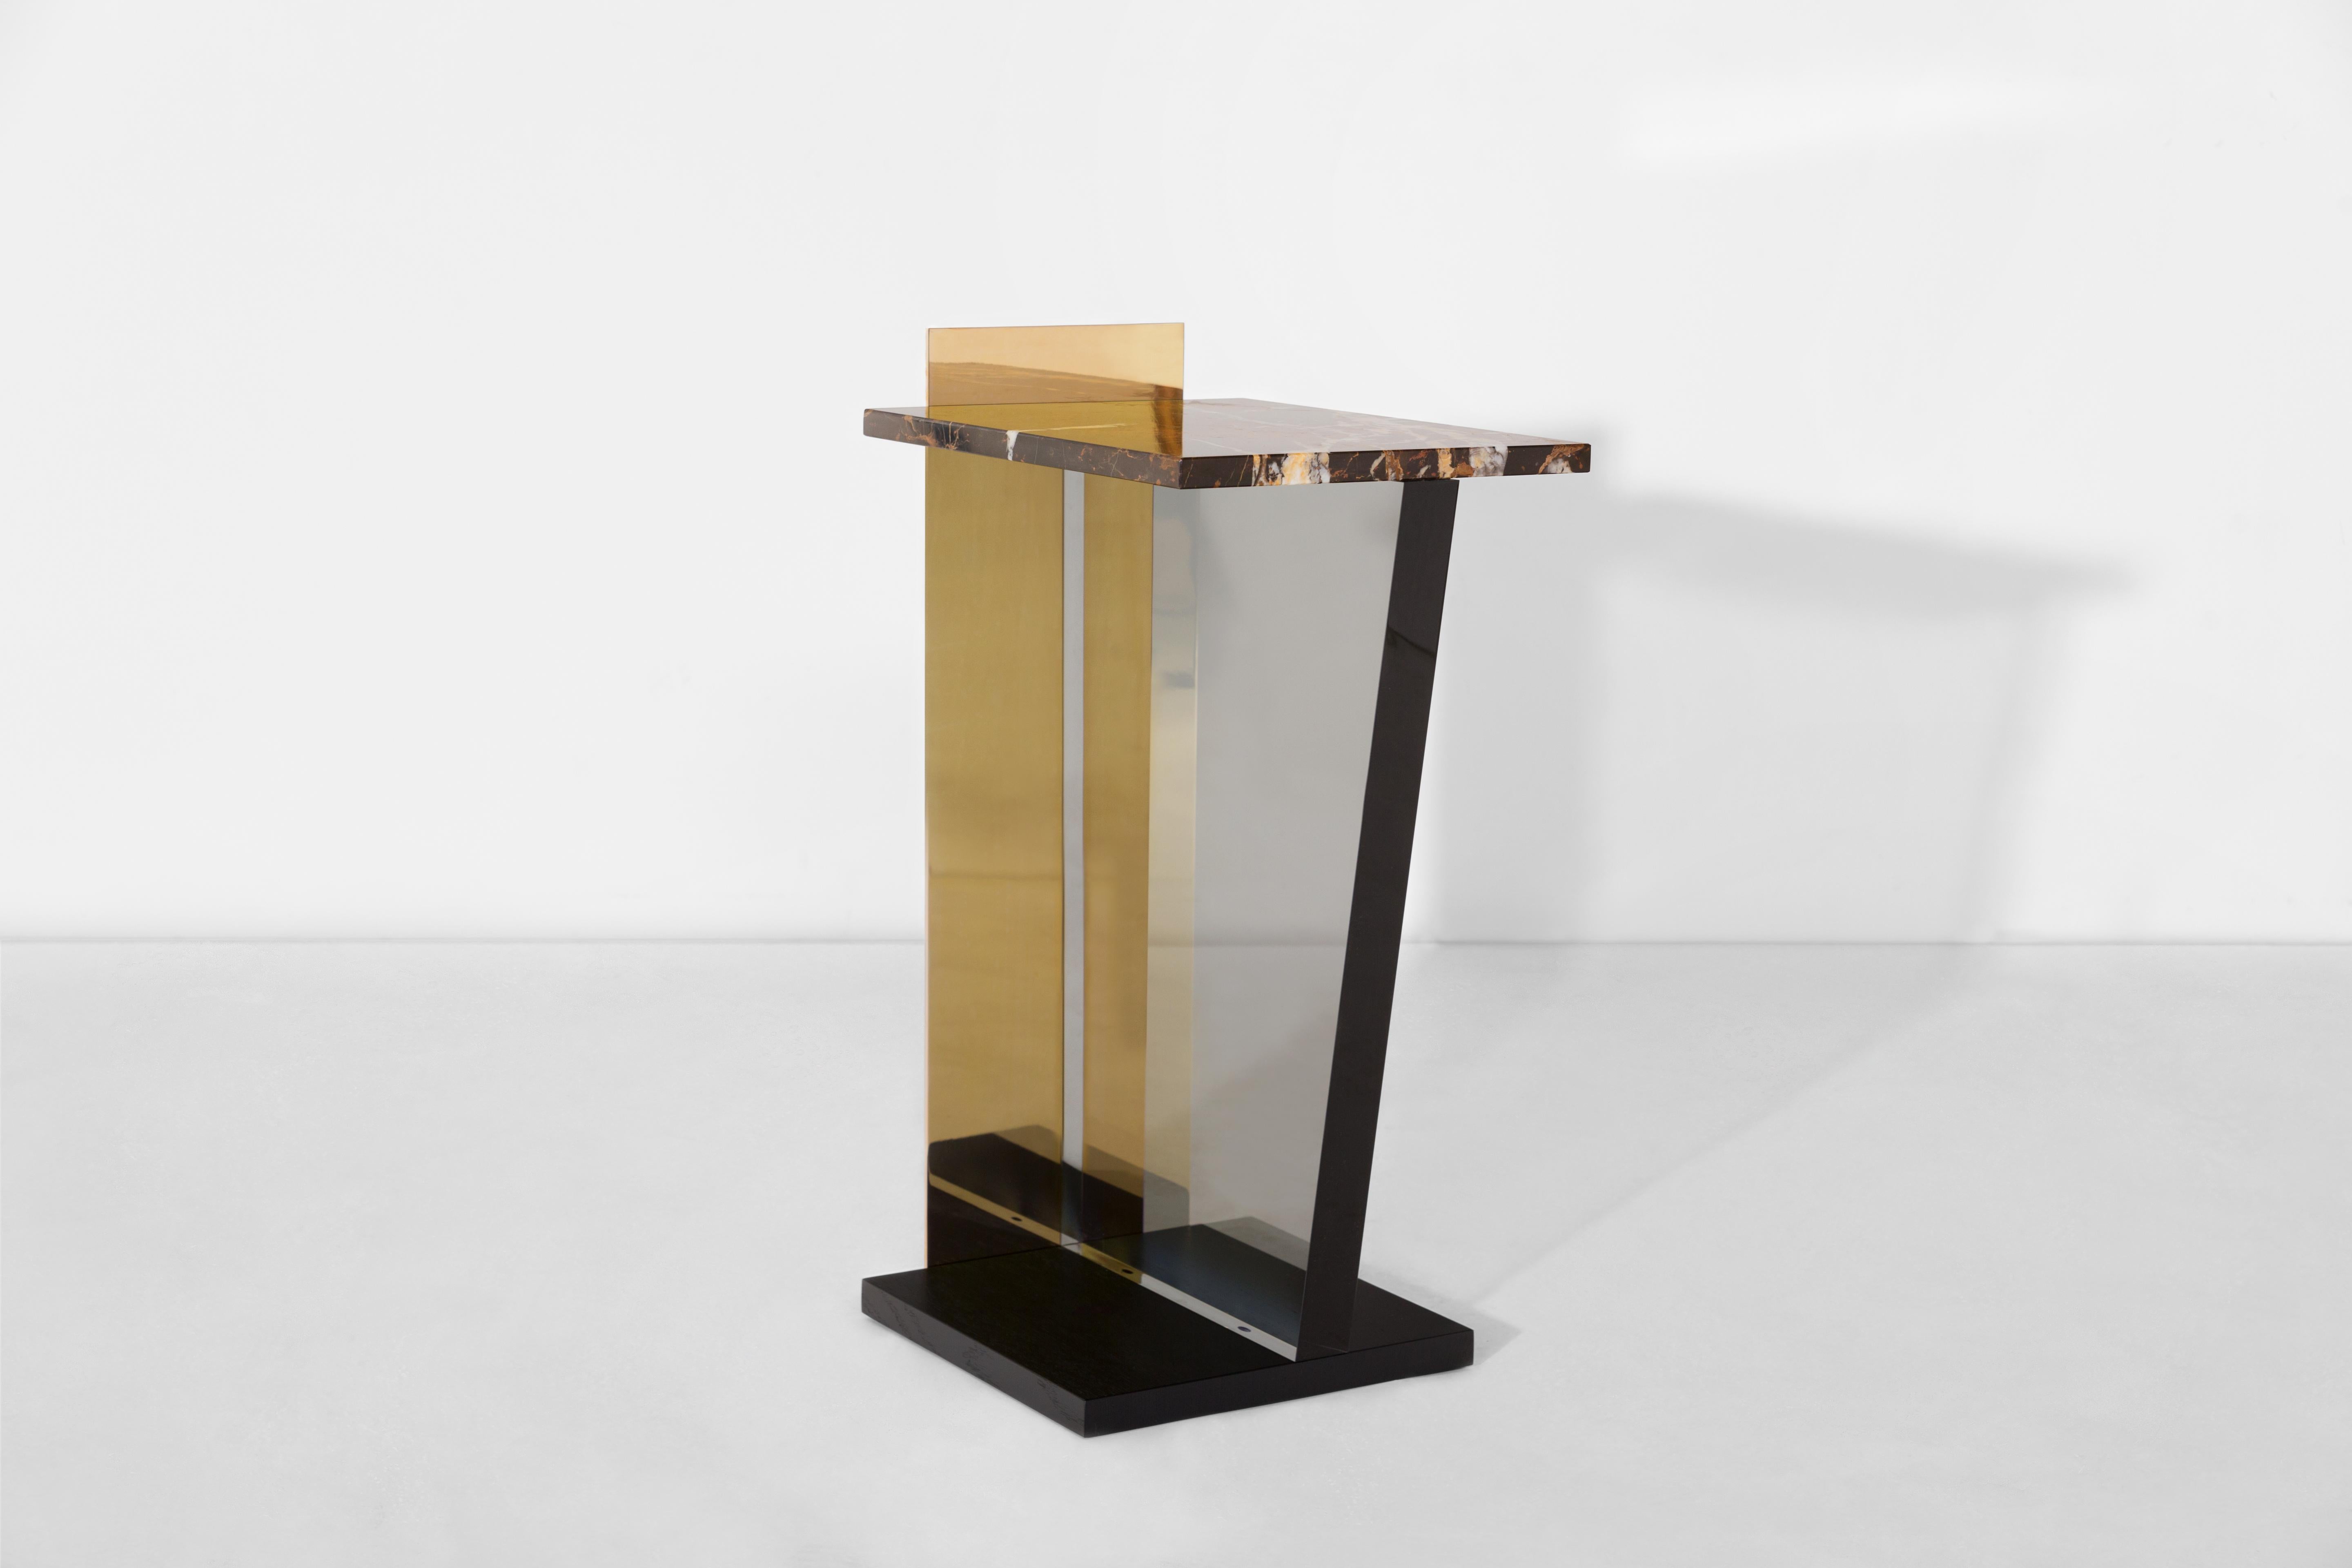 The Servant is at steady disposal to lock a secret inside the thickness of its acrylic glass. The grey acrylic is firm and strong, yet transparent and seemingly fragile. It forms the unexpected connection between a marble top and an oak base. Mirror